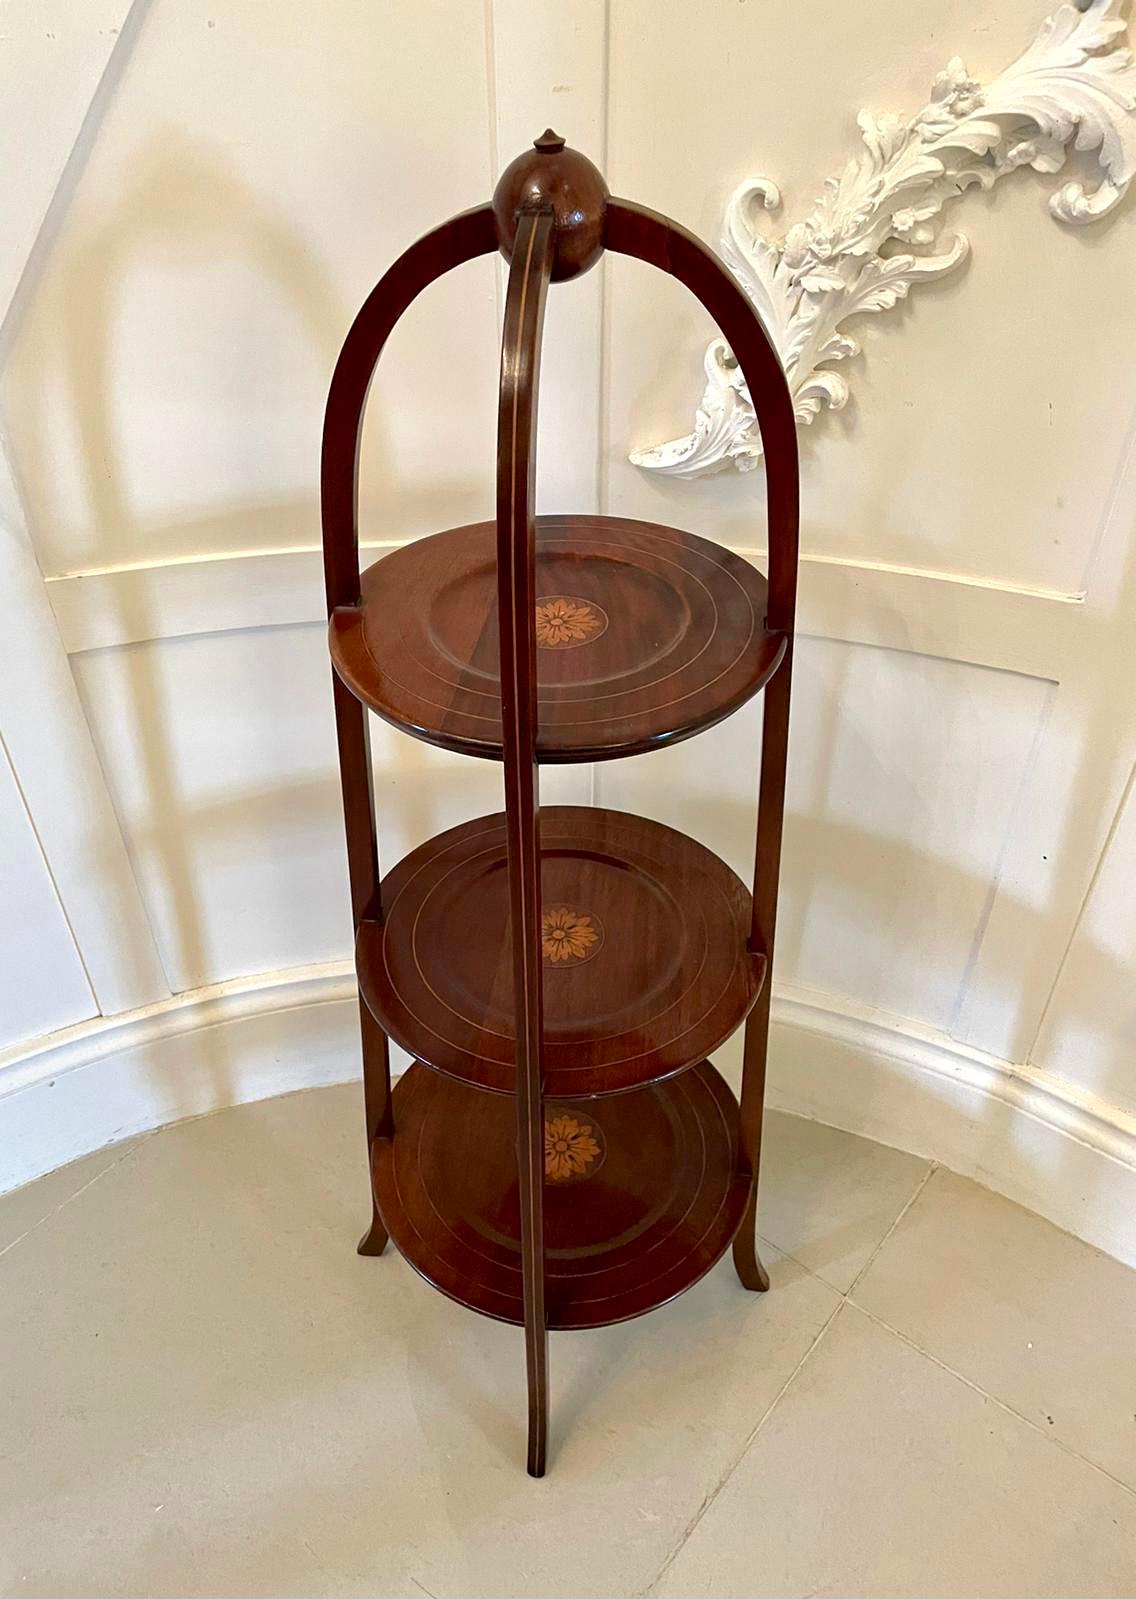 Antique Edwardian inlaid mahogany cake stand having three graduated circular dishes with pretty satinwood inlaid flower heads with a round mahogany handle to the top and supported by three inlaid mahogany legs.

A quality example in lovely